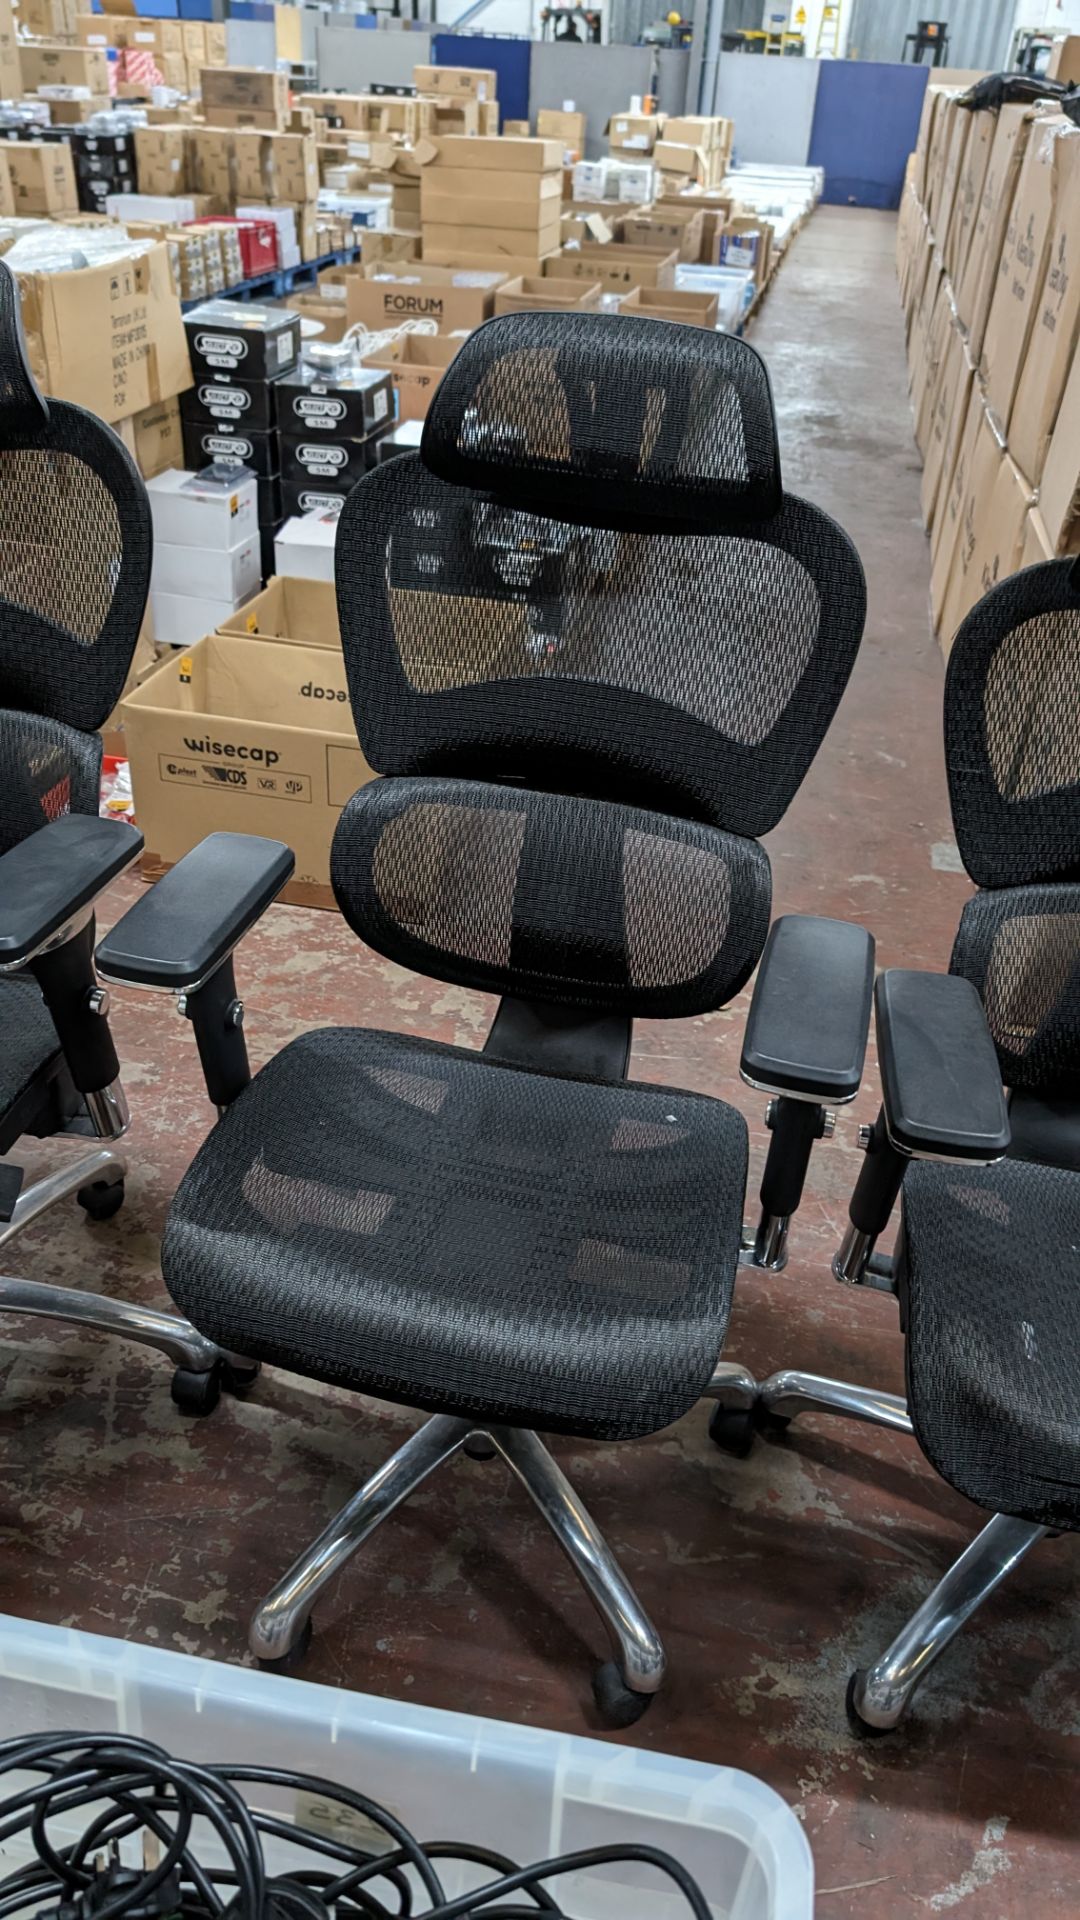 4 off black mesh fabric and chrome modern chairs with arms and headrests. NB: The chairs in lot 24 - Image 4 of 6